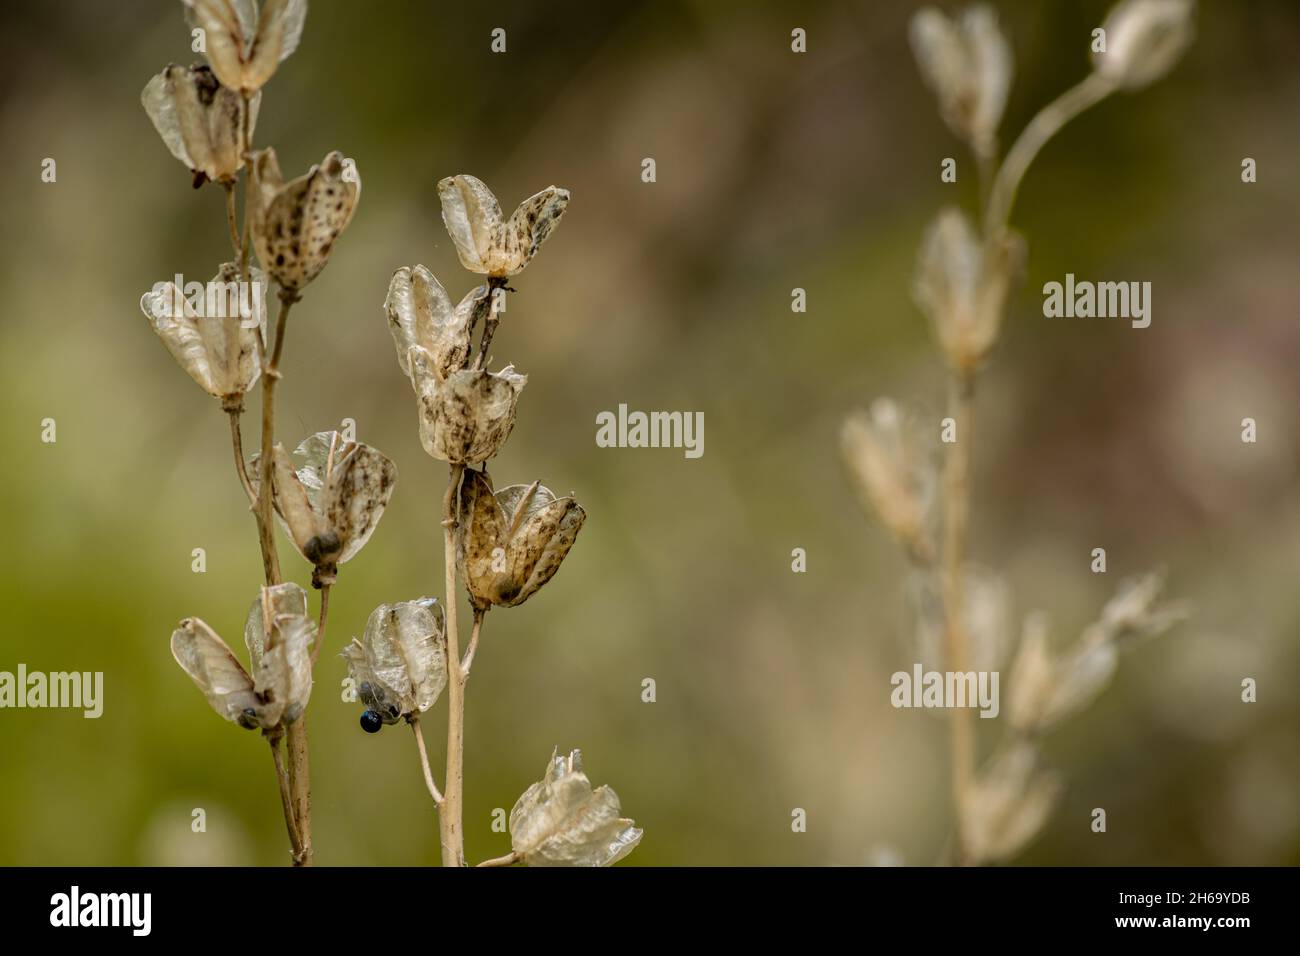 Closeup of dried decaying plants holding seeds inside, blurred background with bokeh in natural setting. Stock Photo